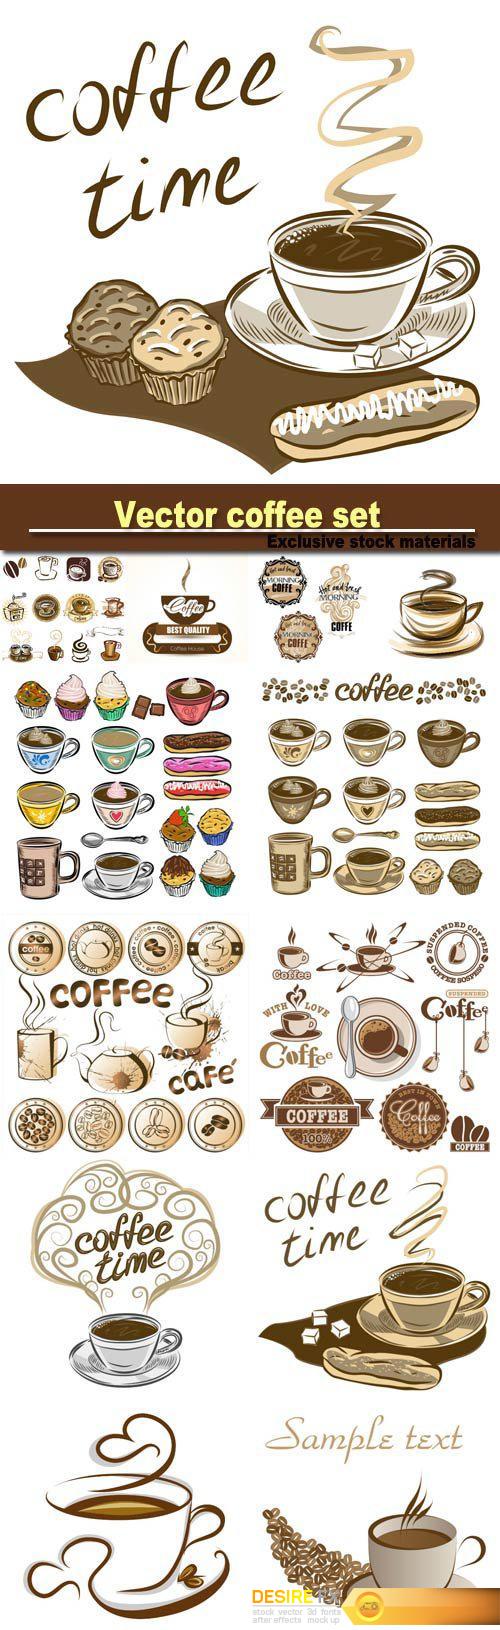 Hand drawn vector coffee set, coffee cups and cakes